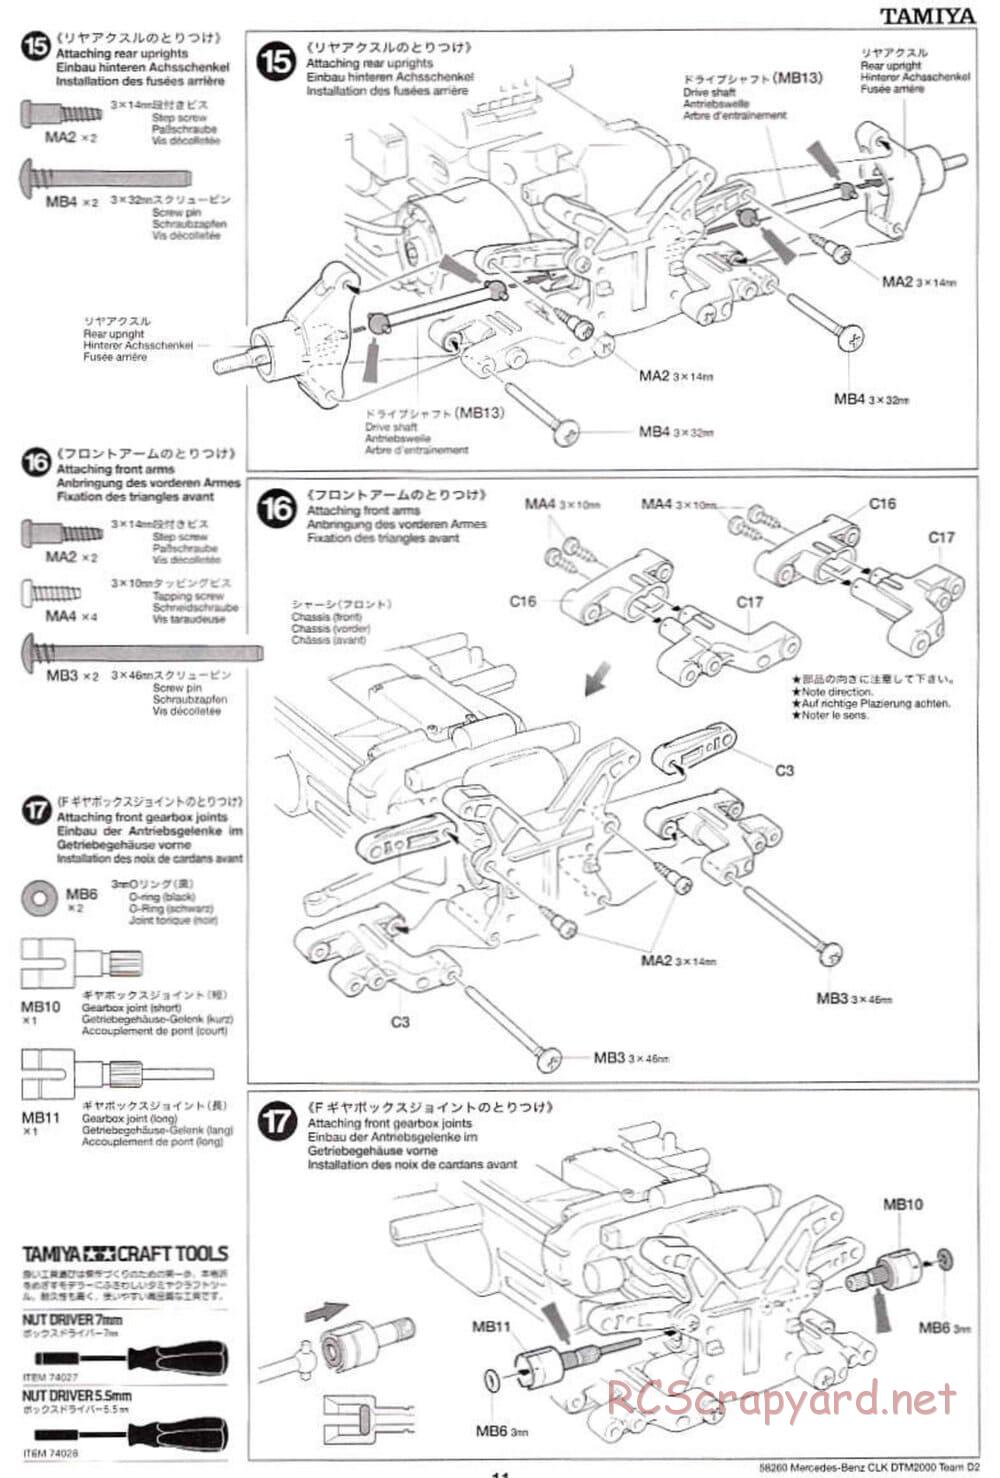 Tamiya - Mercedes Benz CLK DTM 2000 Team D2 - TL-01 Chassis - Manual - Page 11